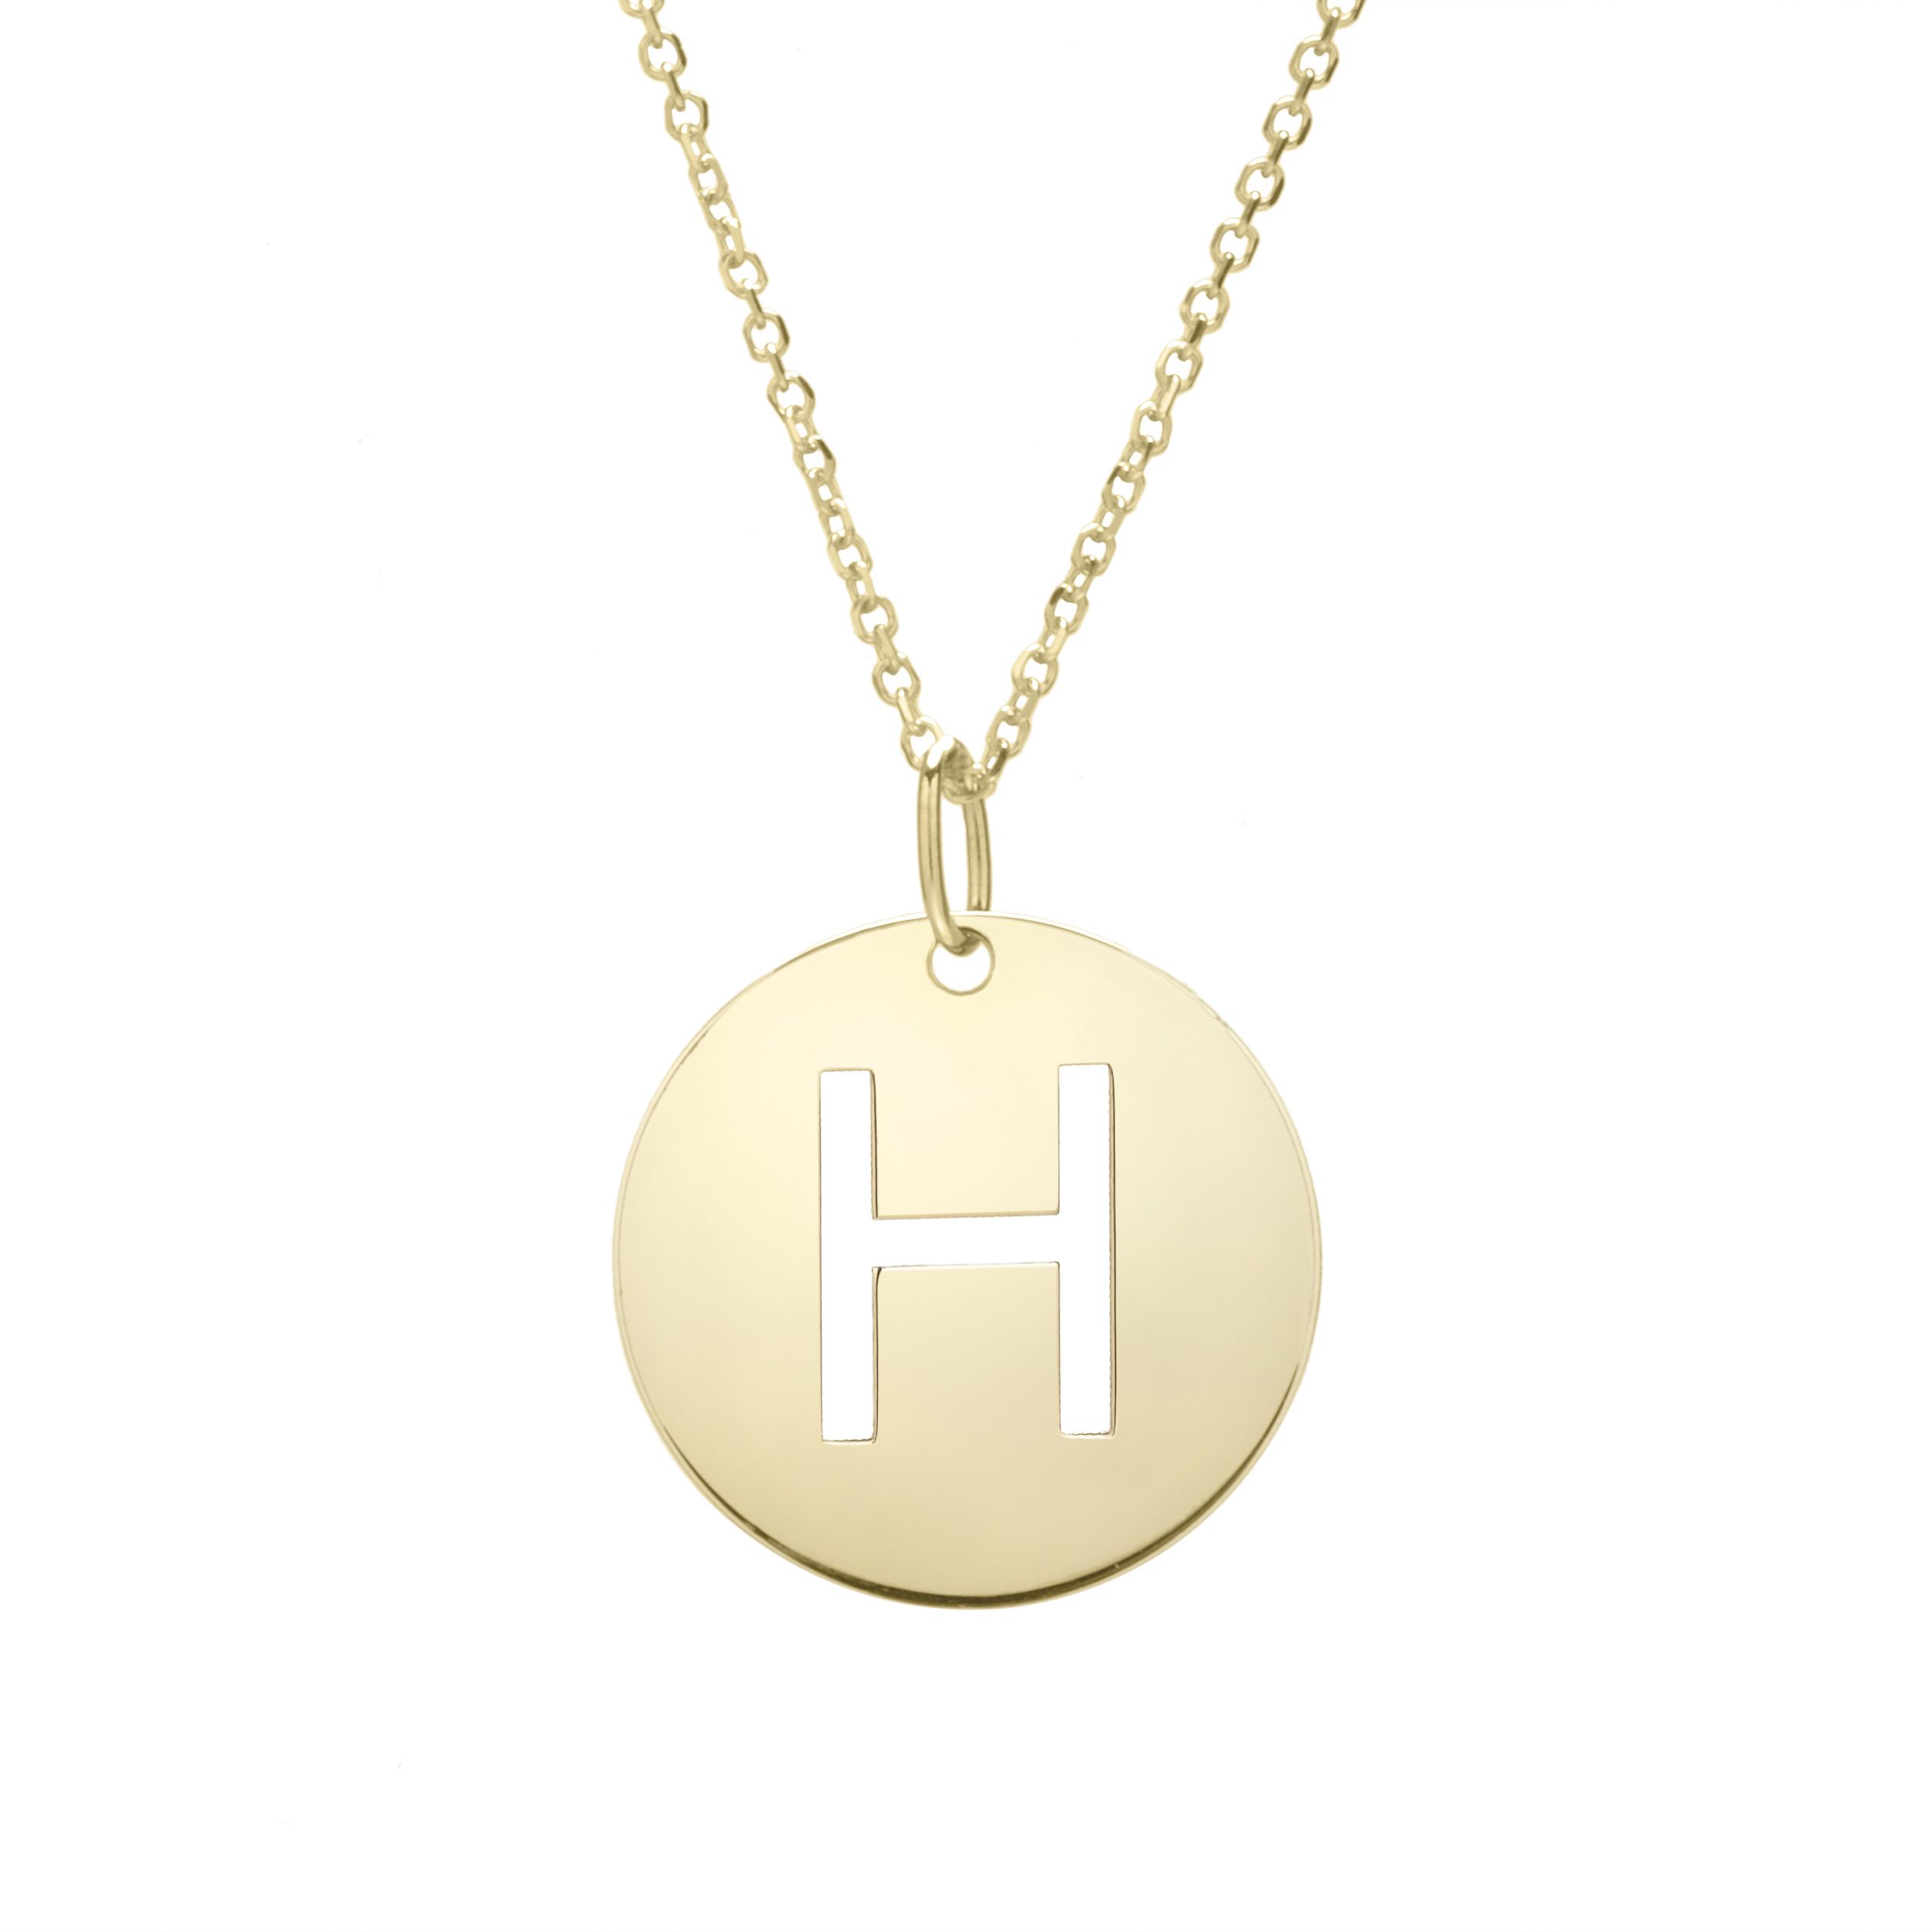 15mm duo sterling silver and gold disc necklace | Daisy Rose Jewellery